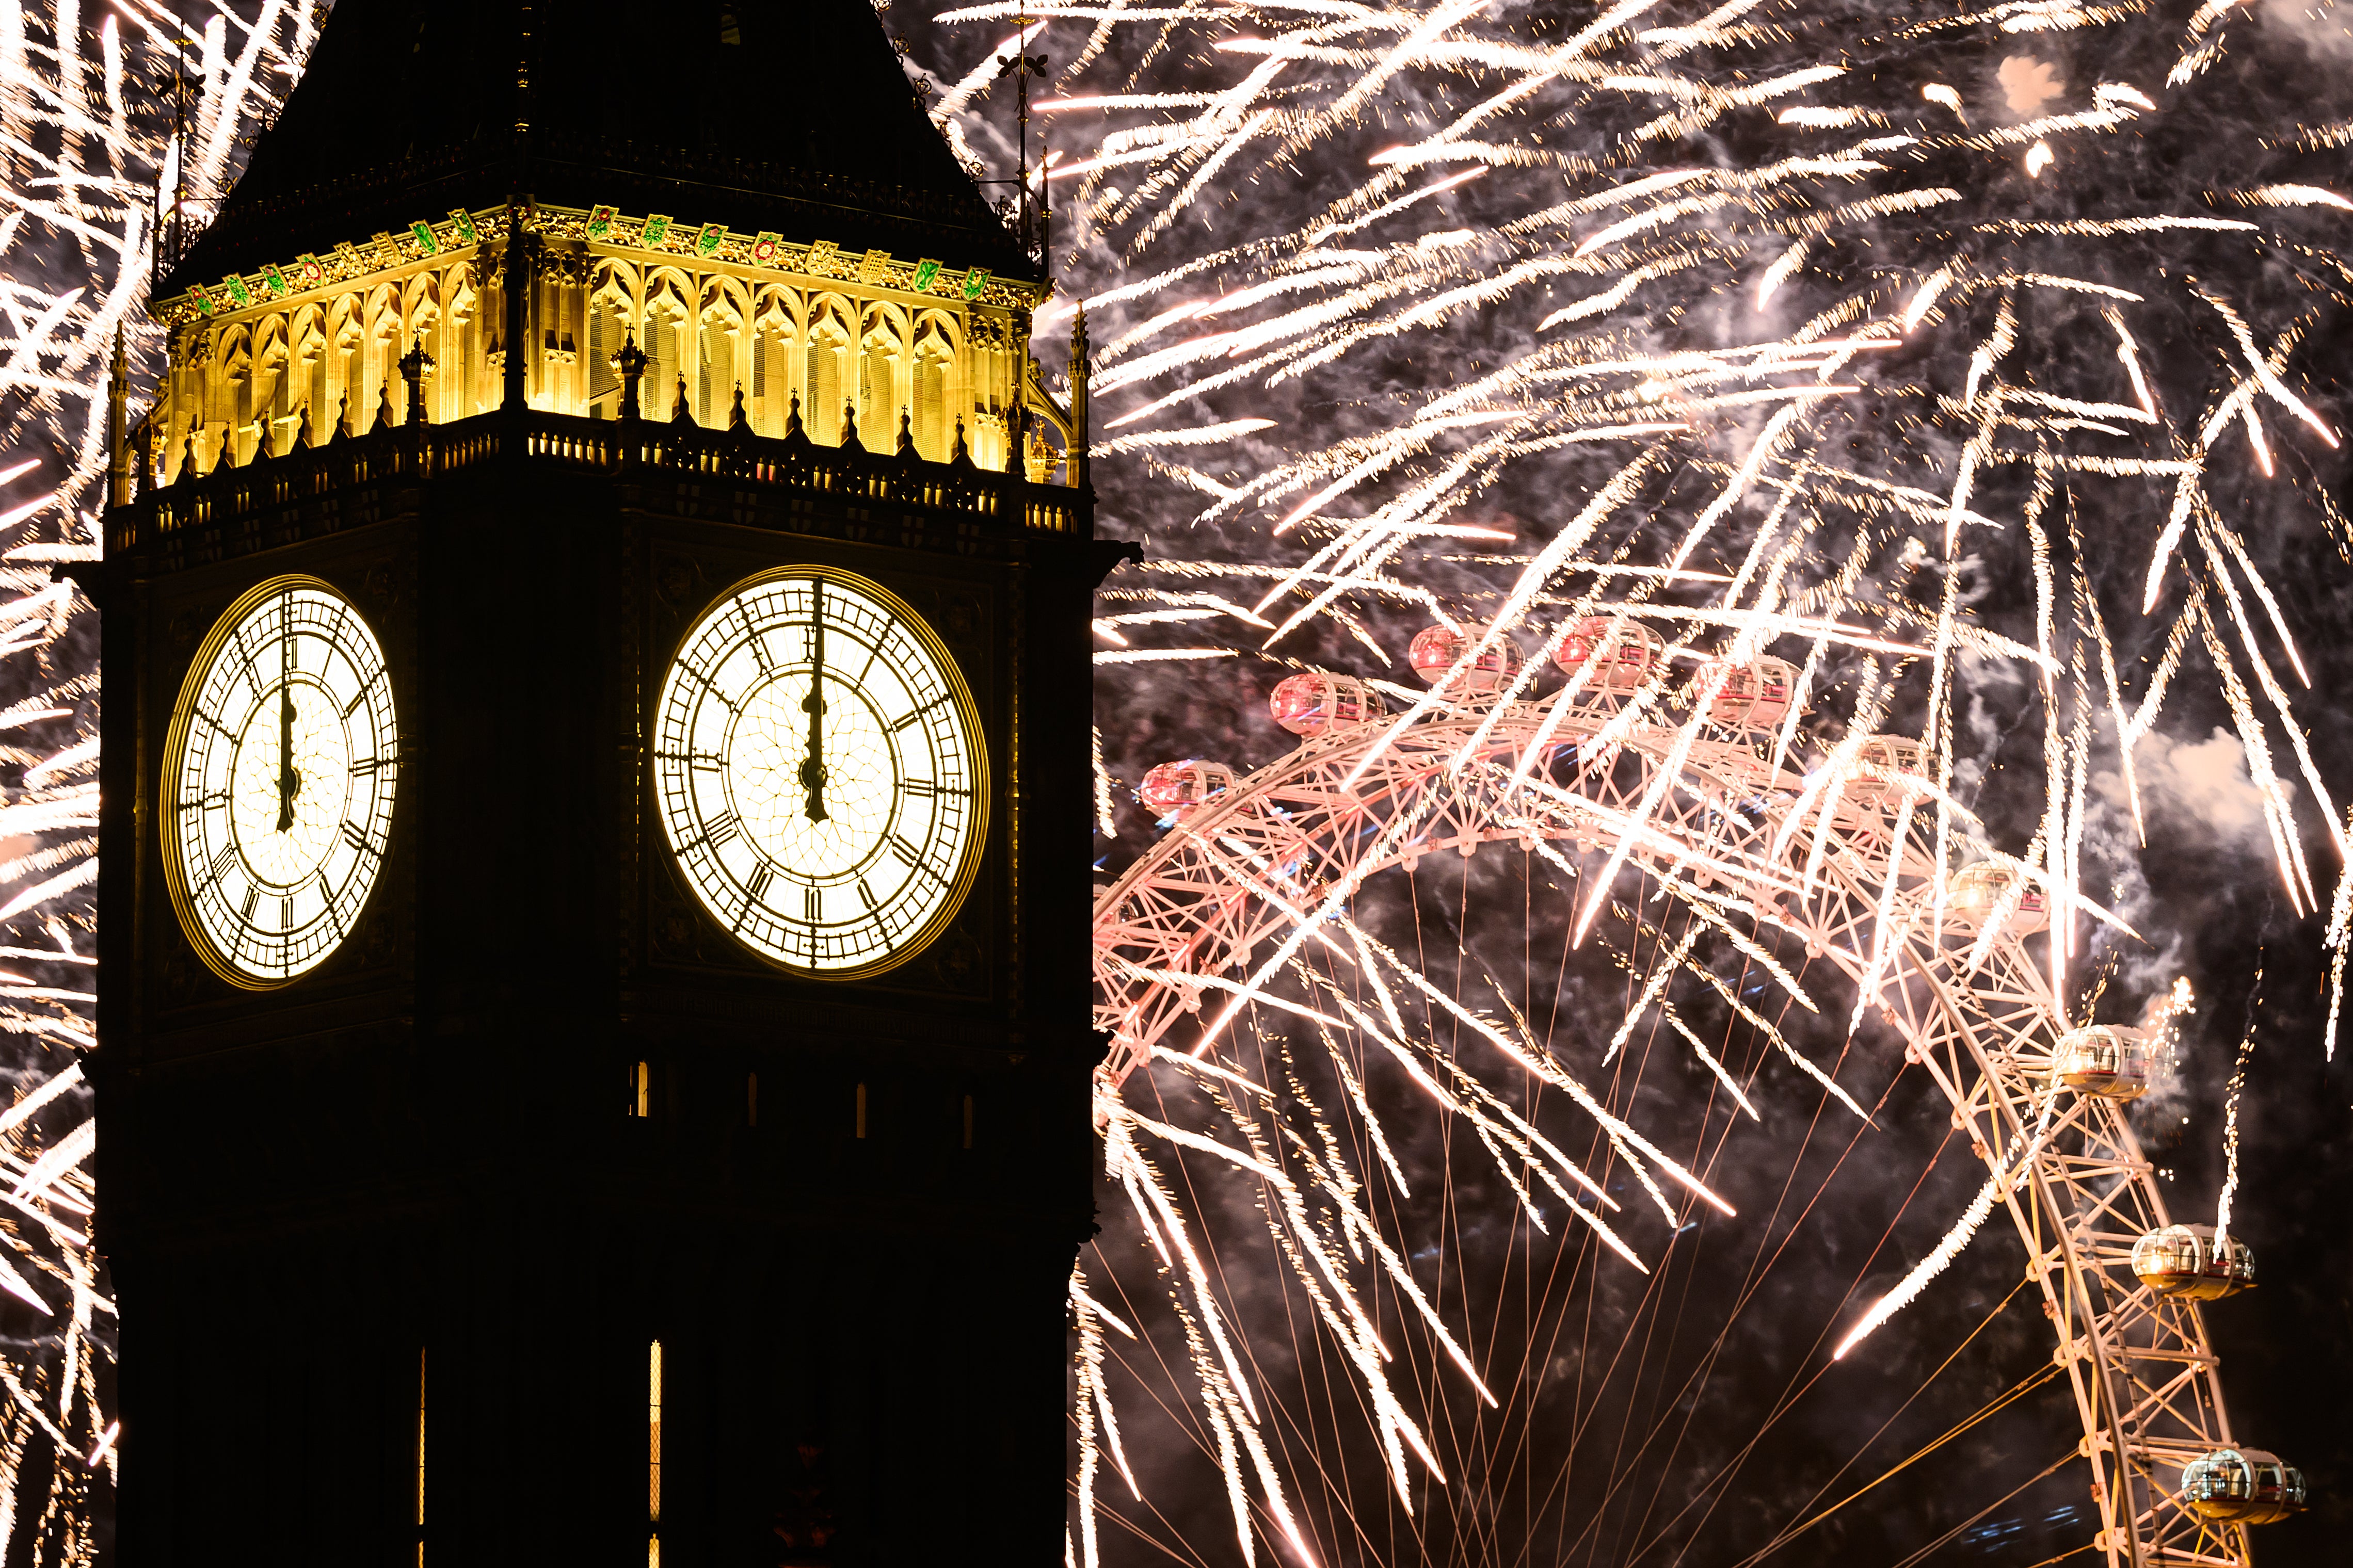 The clock strikes midnight on the face of Queen Elizabeth Tower, commonly known as Big Ben, as fireworks erupt from the London Eye.